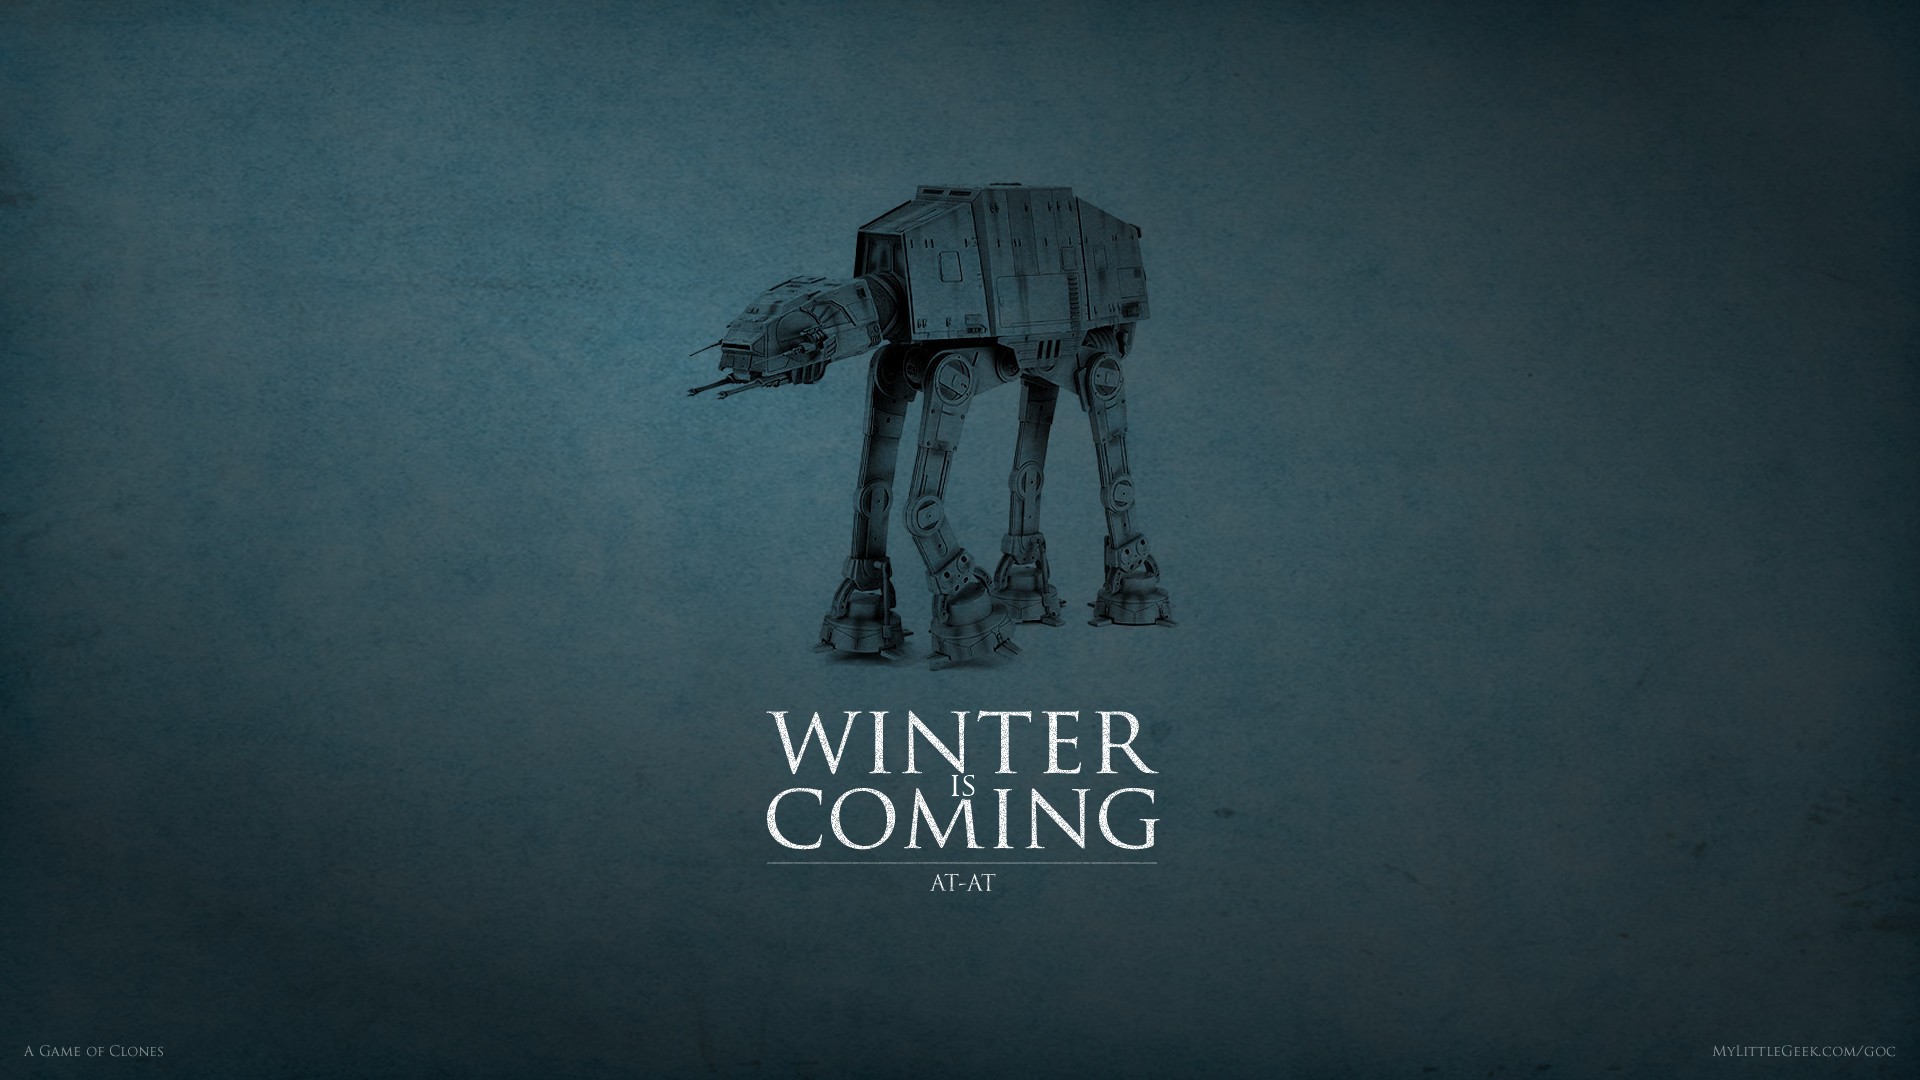 General 1920x1080 Game of Thrones House Stark Star Wars AT-AT crossover Winter Is Coming A Song of Ice and Fire text humor